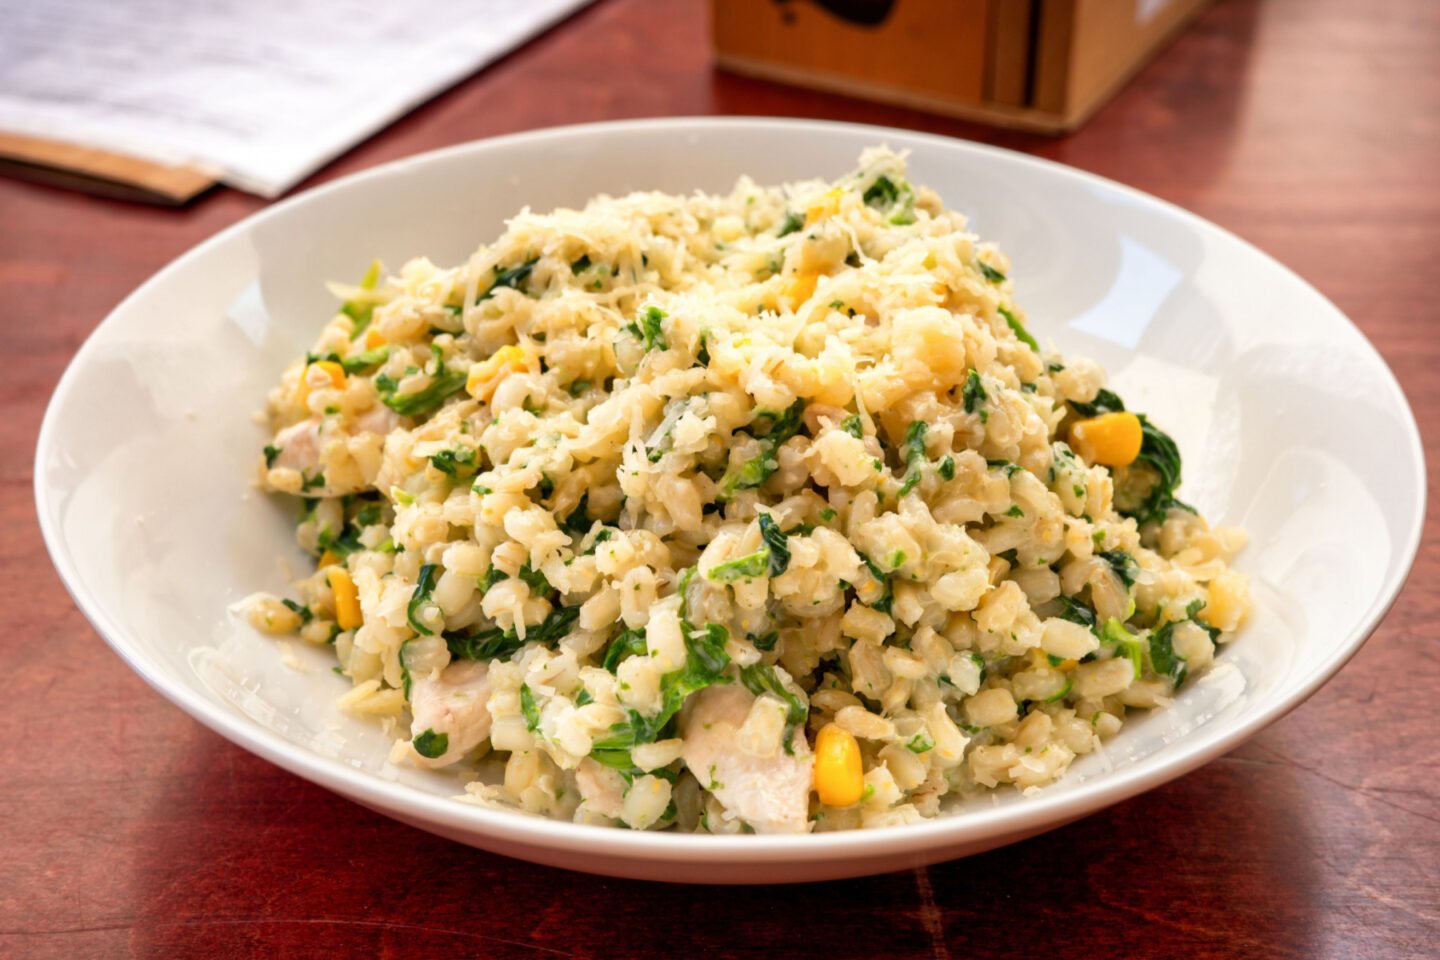 barley groats with chicken vegetables and cheese